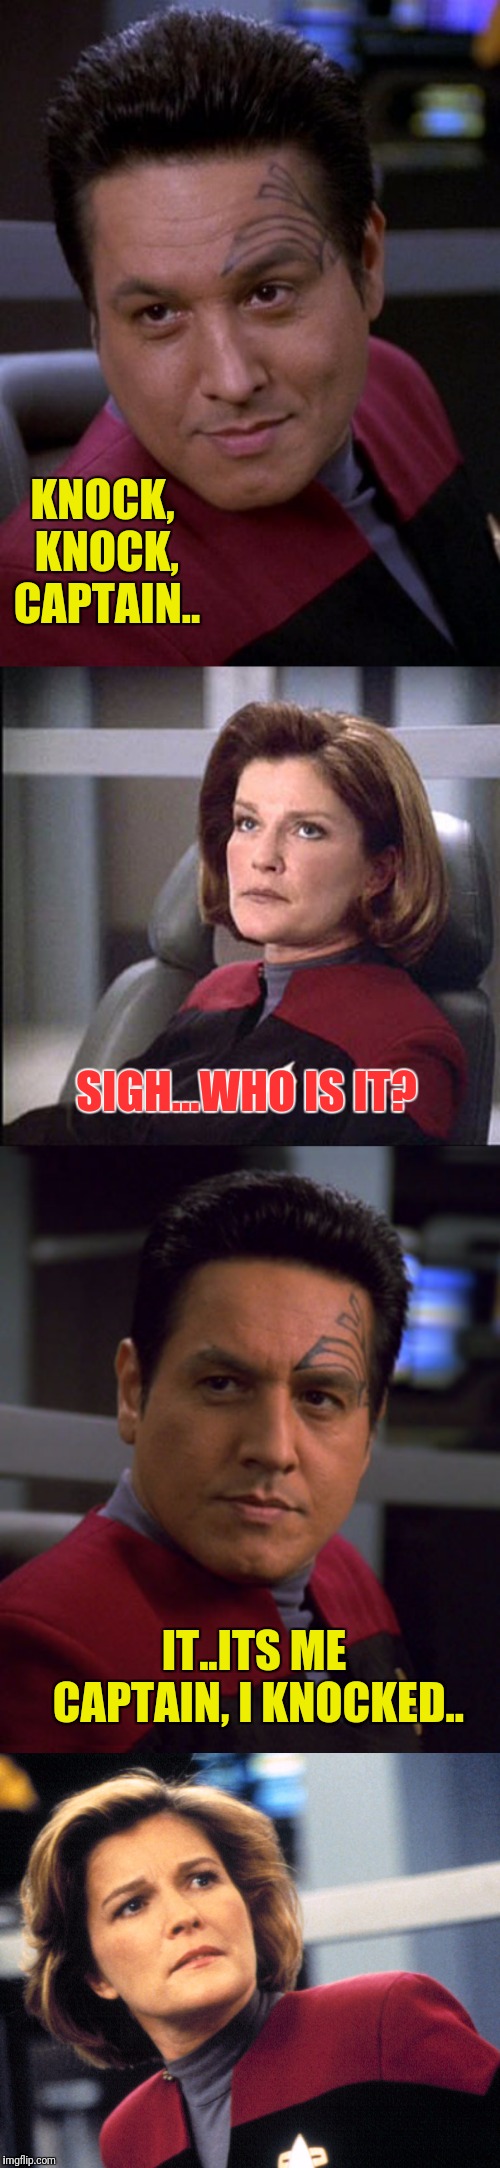 Knock, Knock... | KNOCK, KNOCK, CAPTAIN.. SIGH...WHO IS IT? IT..ITS ME CAPTAIN, I KNOCKED.. | image tagged in star trek voyager,janeway,knock knock,test your stupidity | made w/ Imgflip meme maker